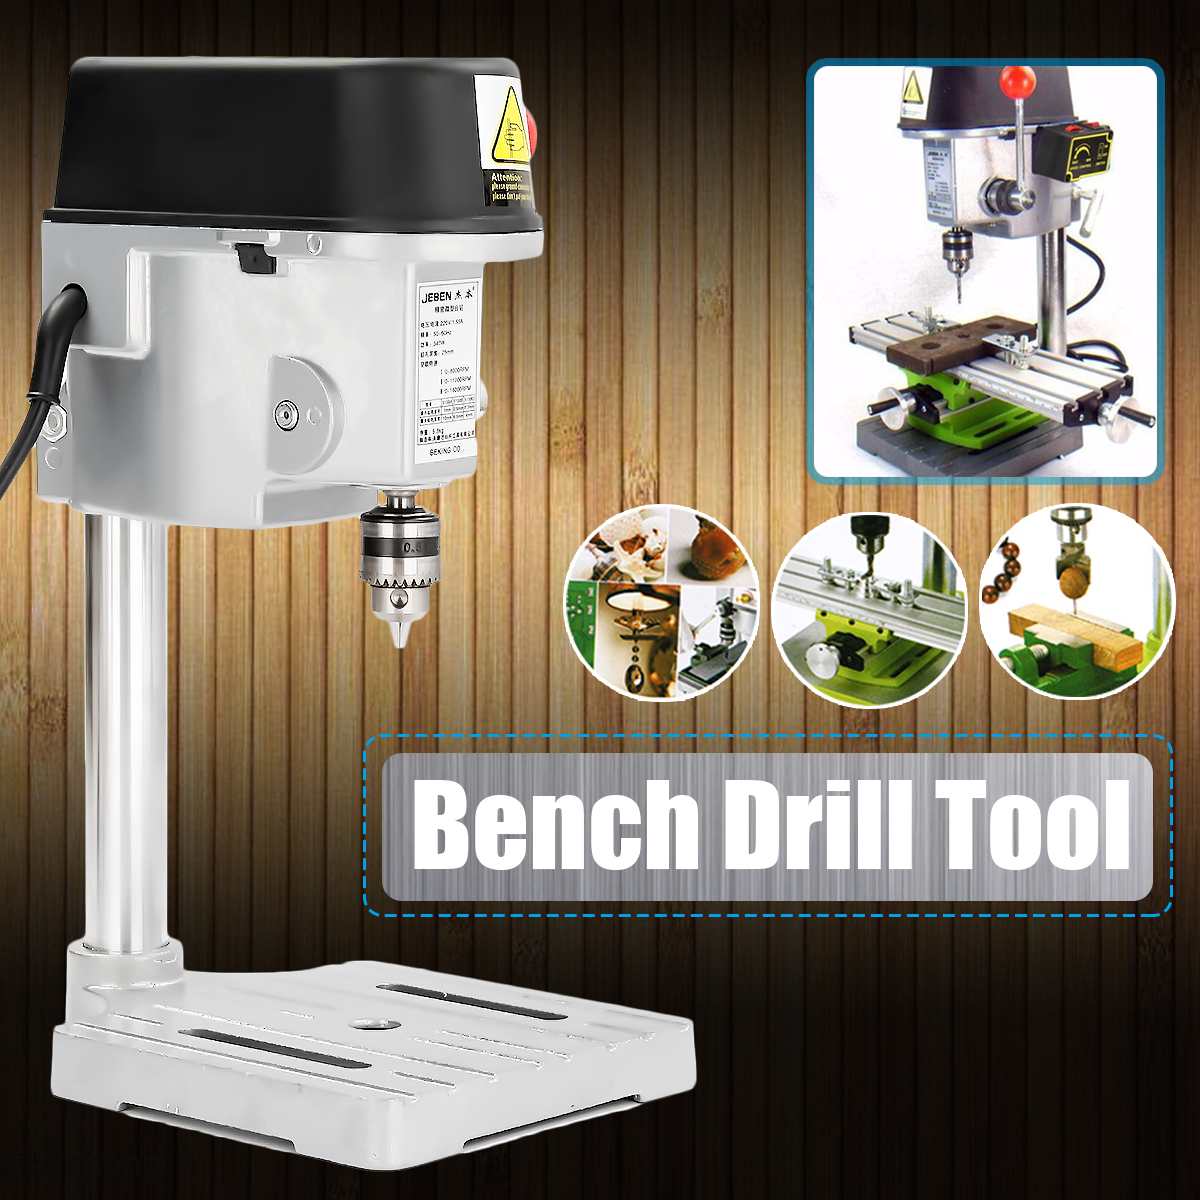 220V Drill Press Mini Drilling Machine 240W for Bench Machine Table Bit Drilling Chuck 0.6-6.5mm Wood Metal Electrical Tools